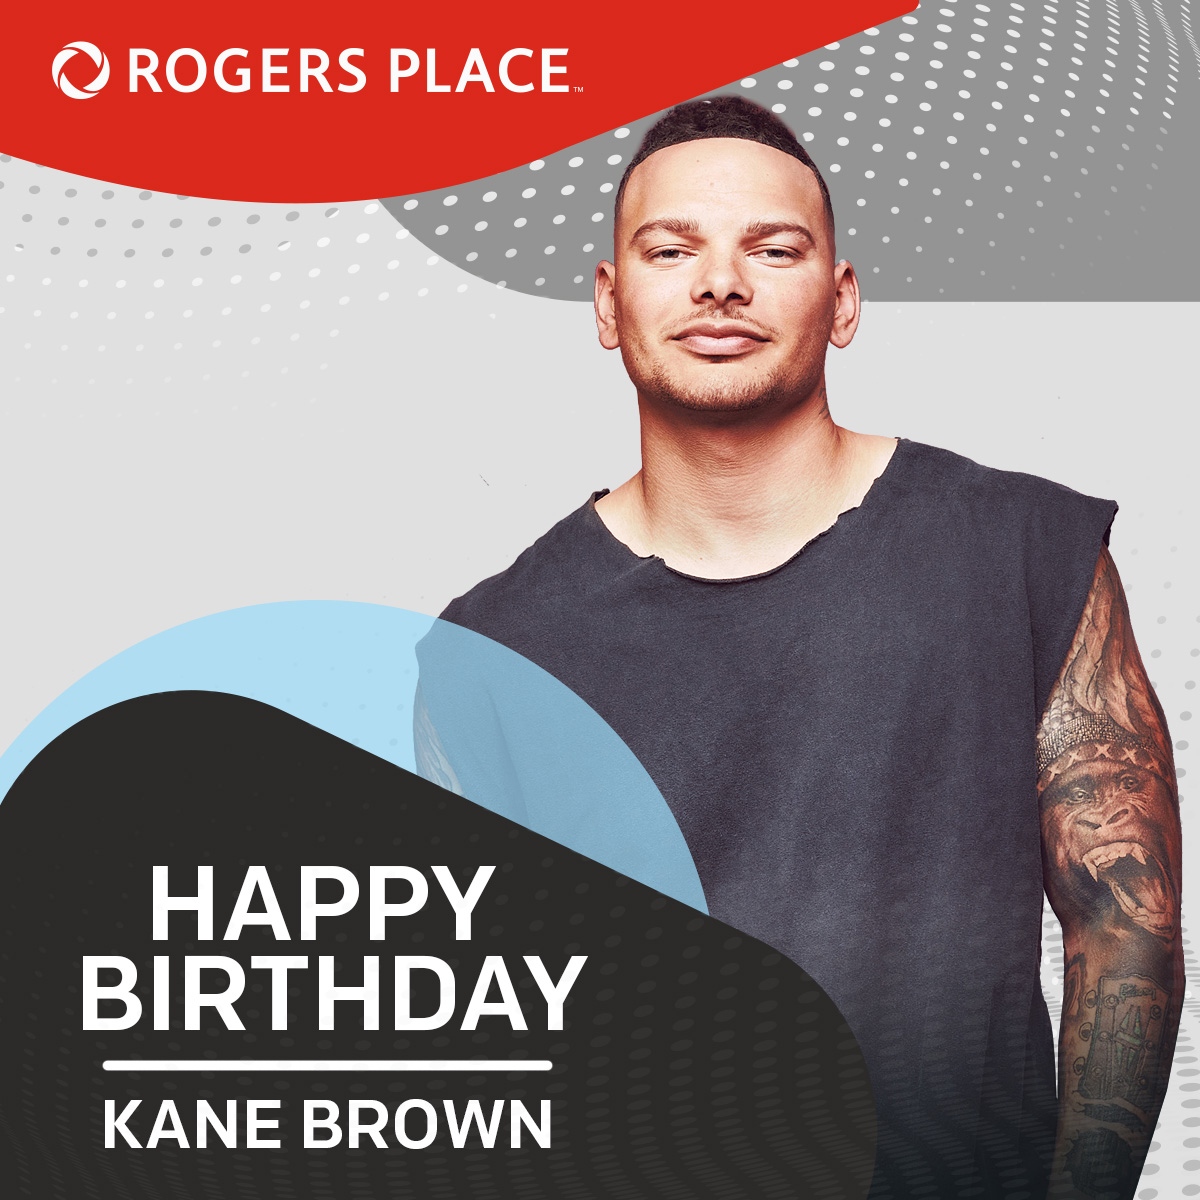 🎂🥳 Wishing the incredible @KaneBrown a very Happy Birthday today!! Tickets are still available for his show on December 18, get yours now! 🎫: RogersPlace.com/KaneBrown